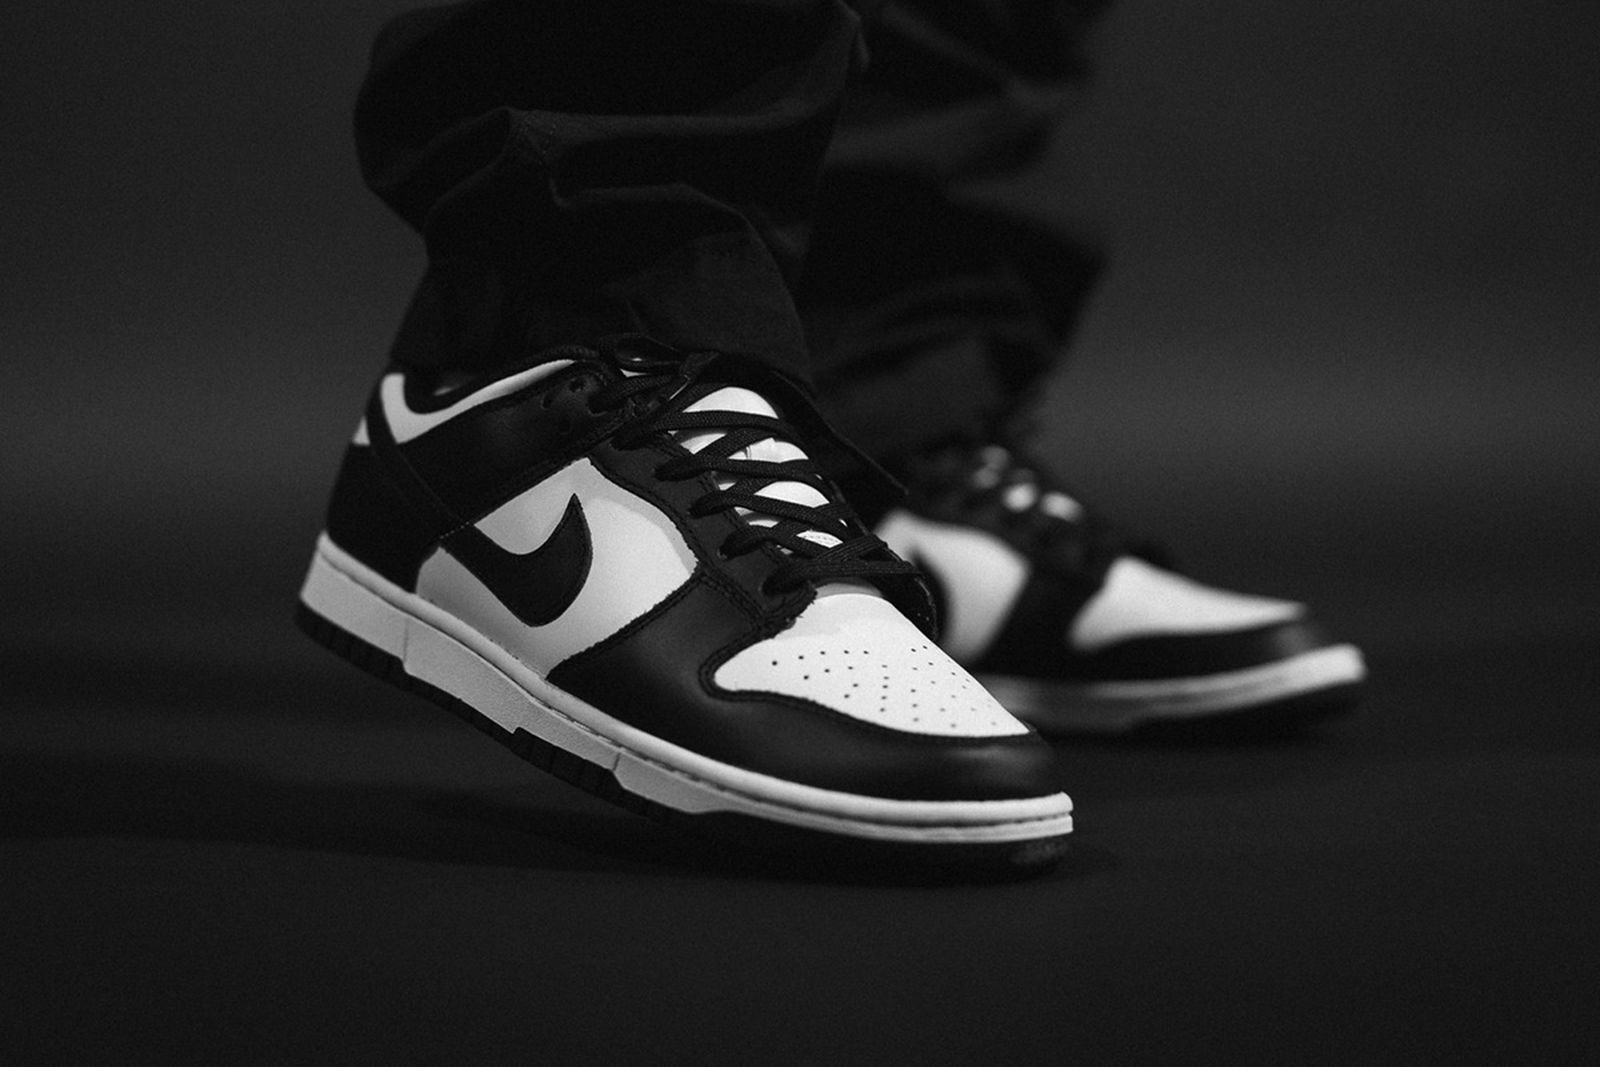 Nike Dunk Low dunk low black white “Black/White”: Official Release Information